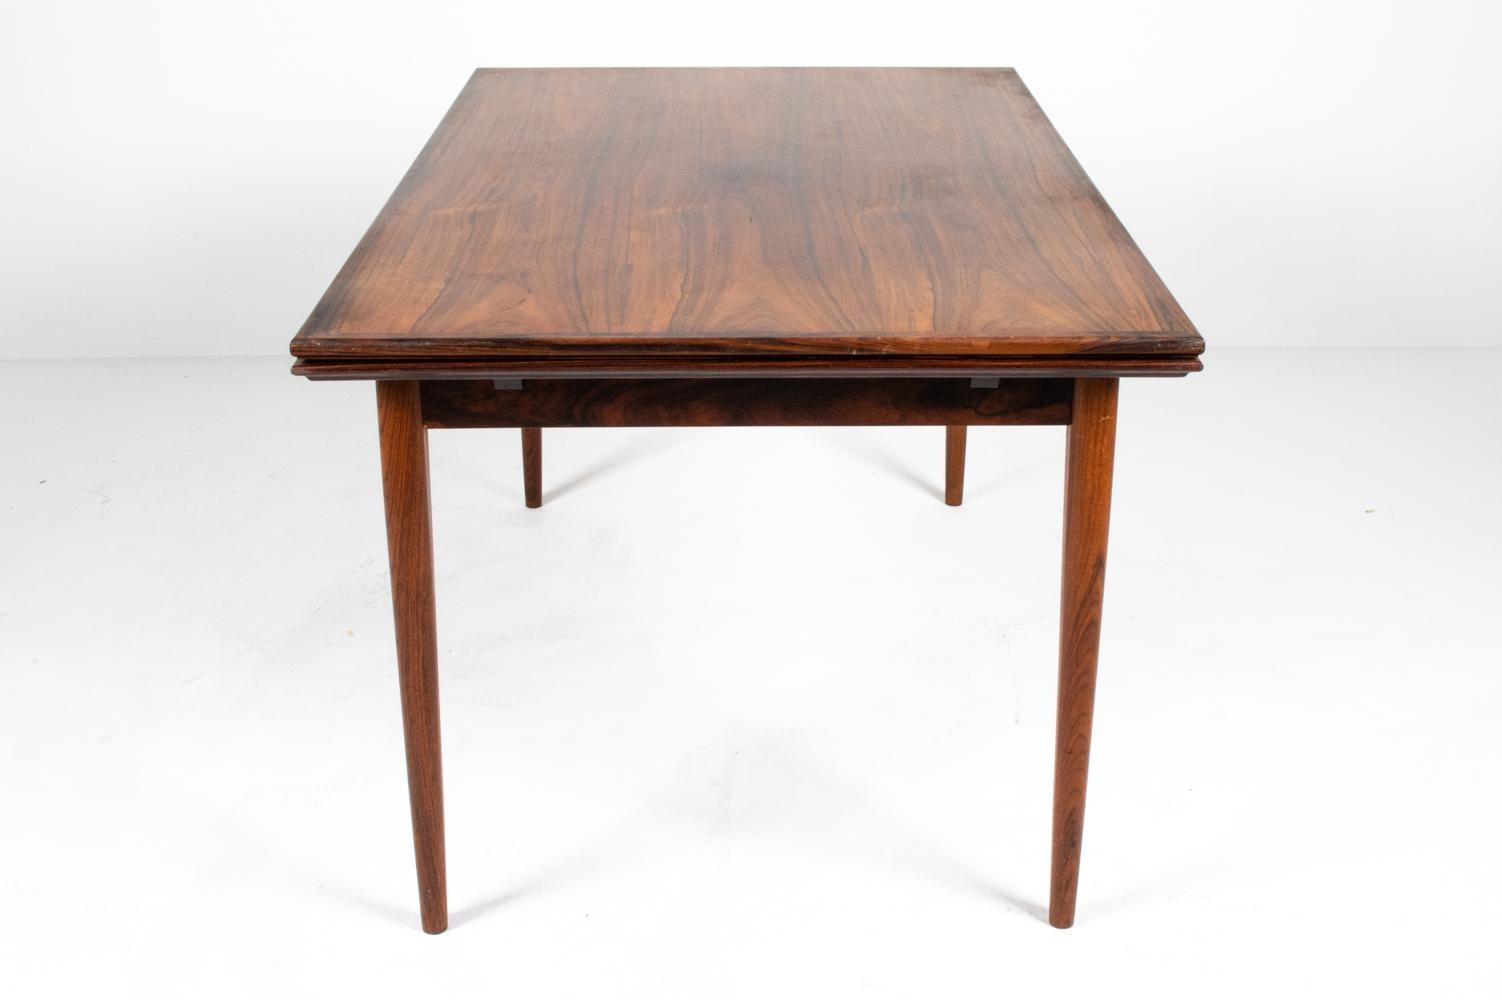 Danish Mid-Century Rosewood Extension Dining Table, c. 1960's For Sale 1